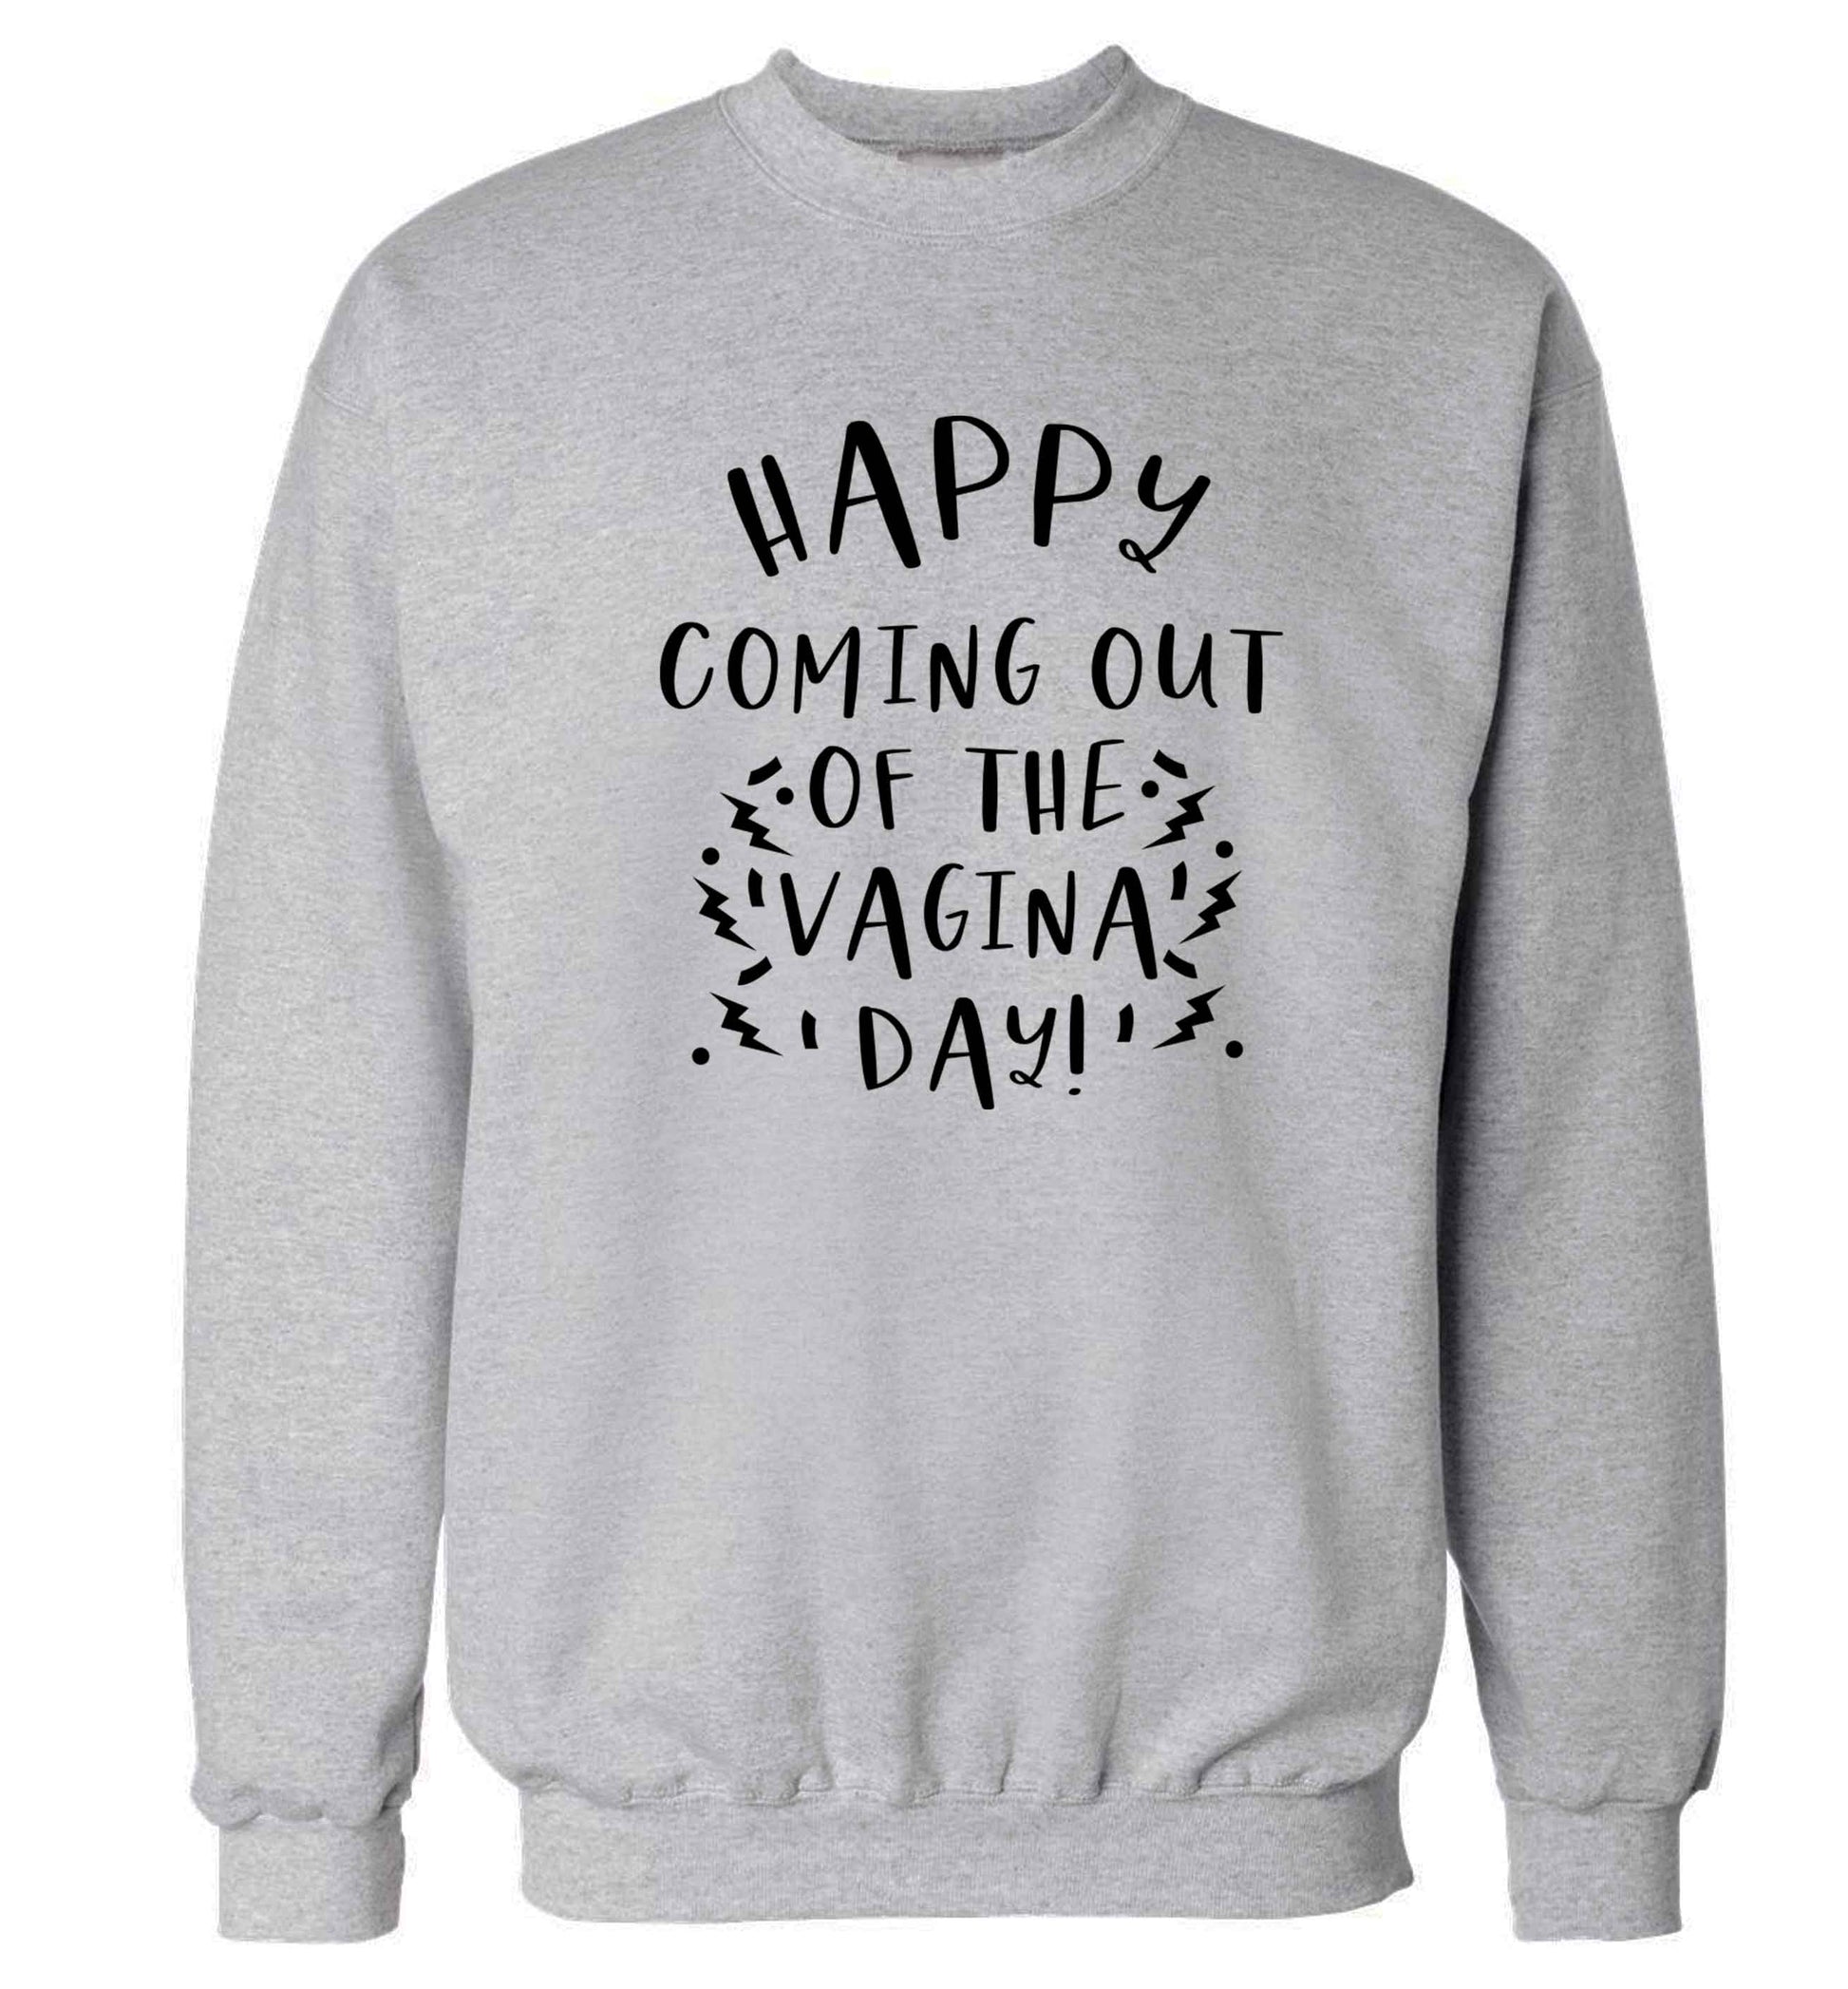 Happy coming out of the vagina day Adult's unisex grey Sweater 2XL